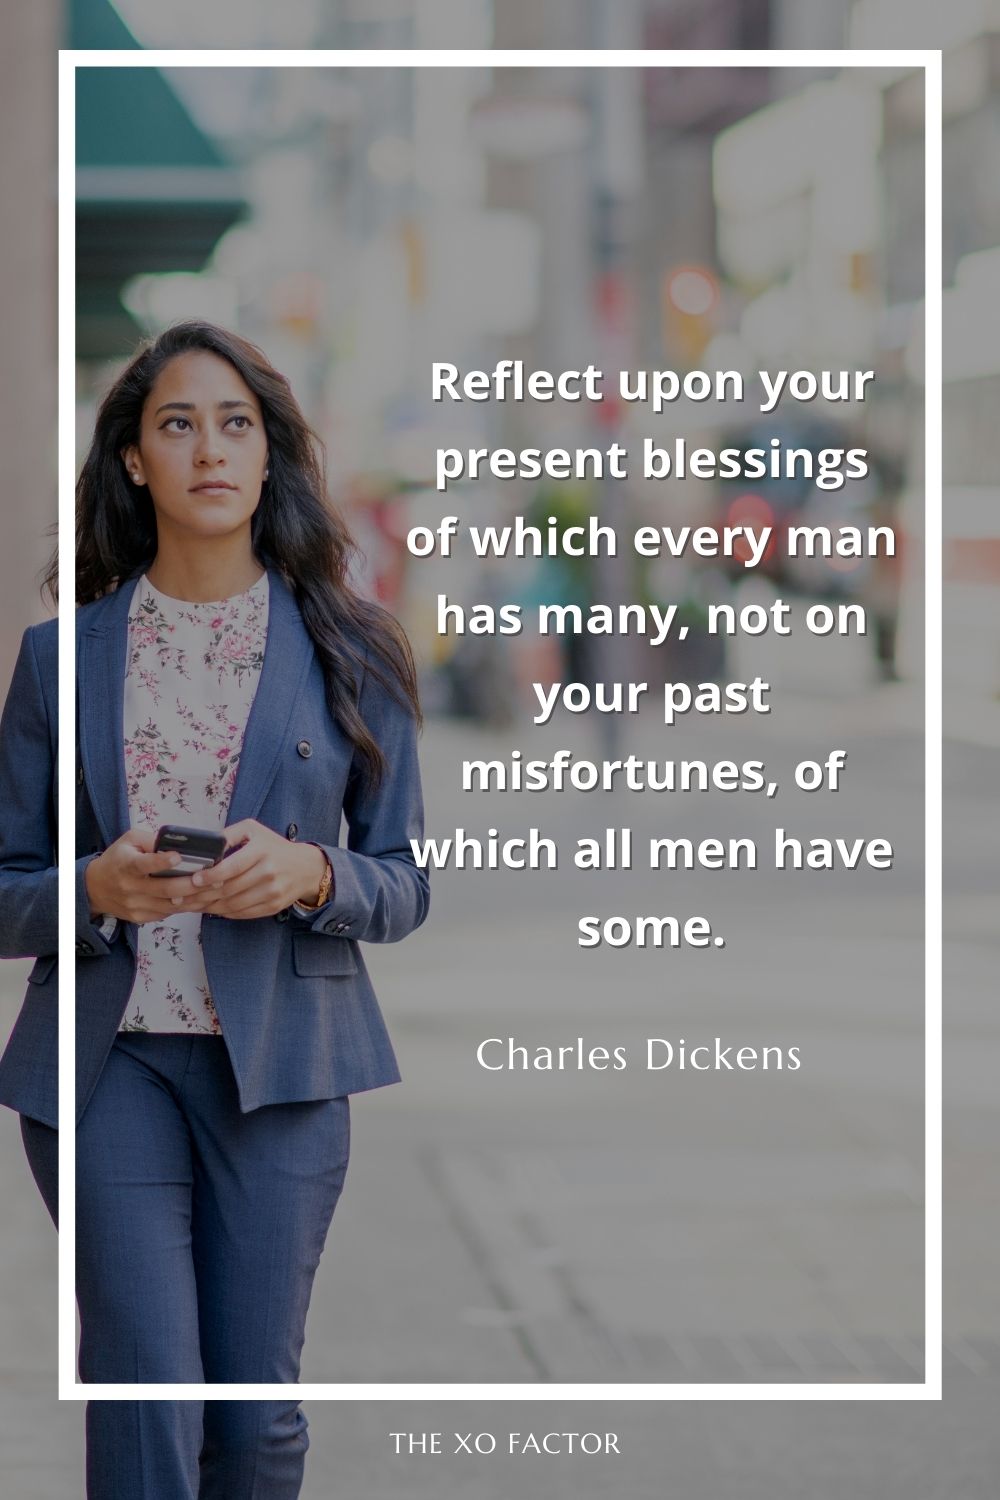 Reflect upon your present blessings of which every man has many, not on your past misfortunes, of which all men have some.